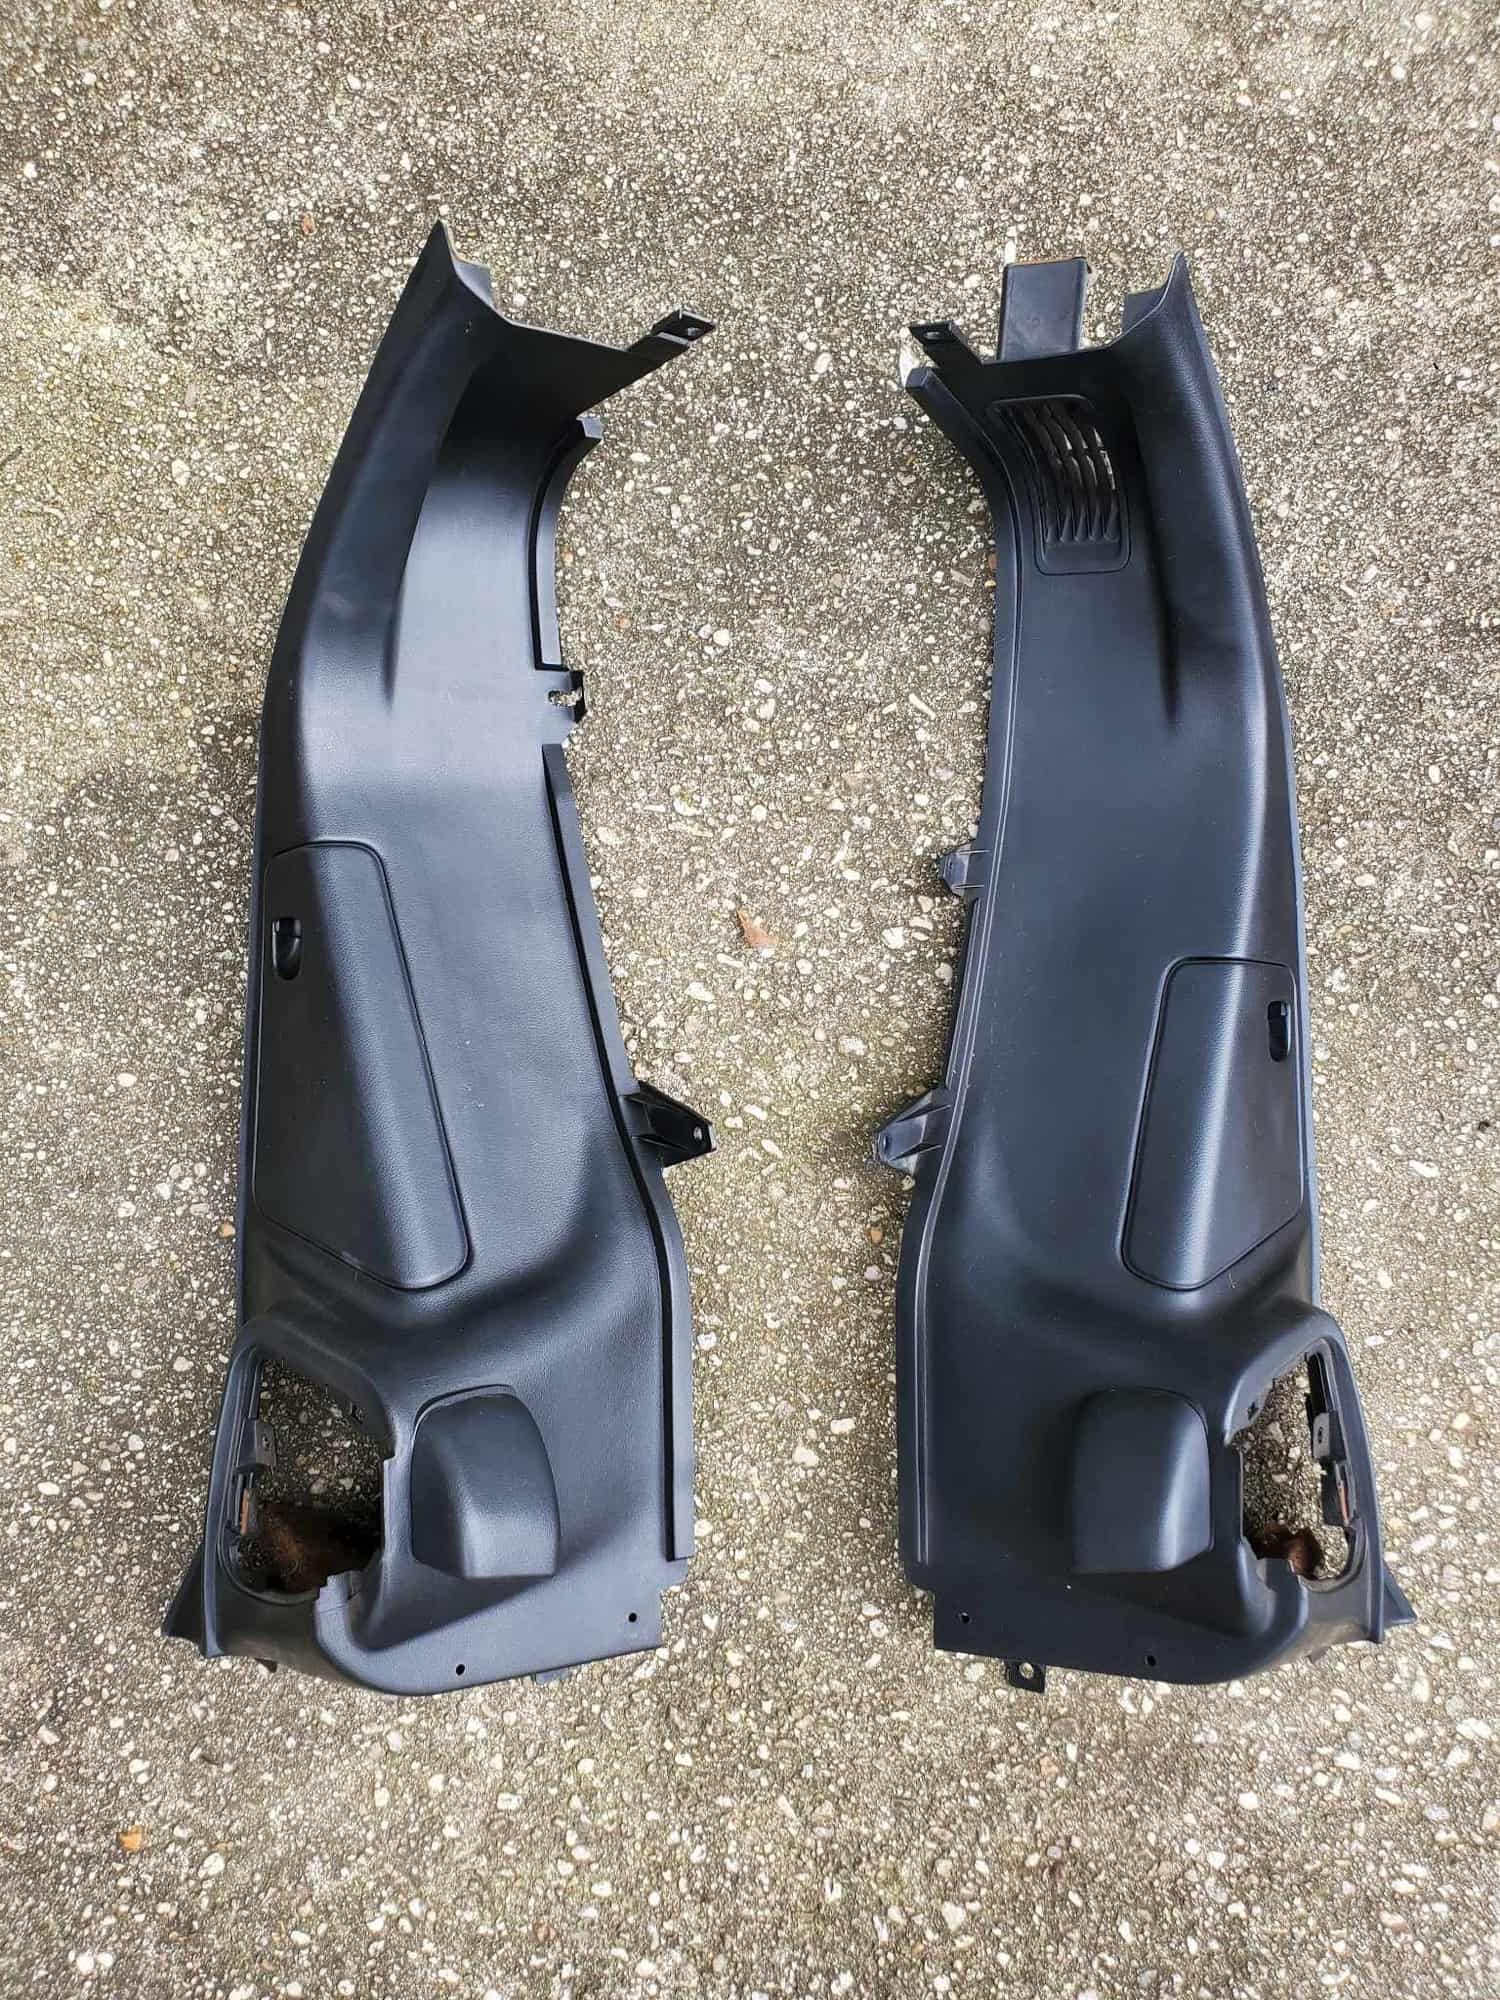 Miscellaneous - FD3S Limited Part Out - Body - Interior - Exterior - Electronics - Used - 1993 to 2002 Mazda RX-7 - Annapolis, MD 21401, United States